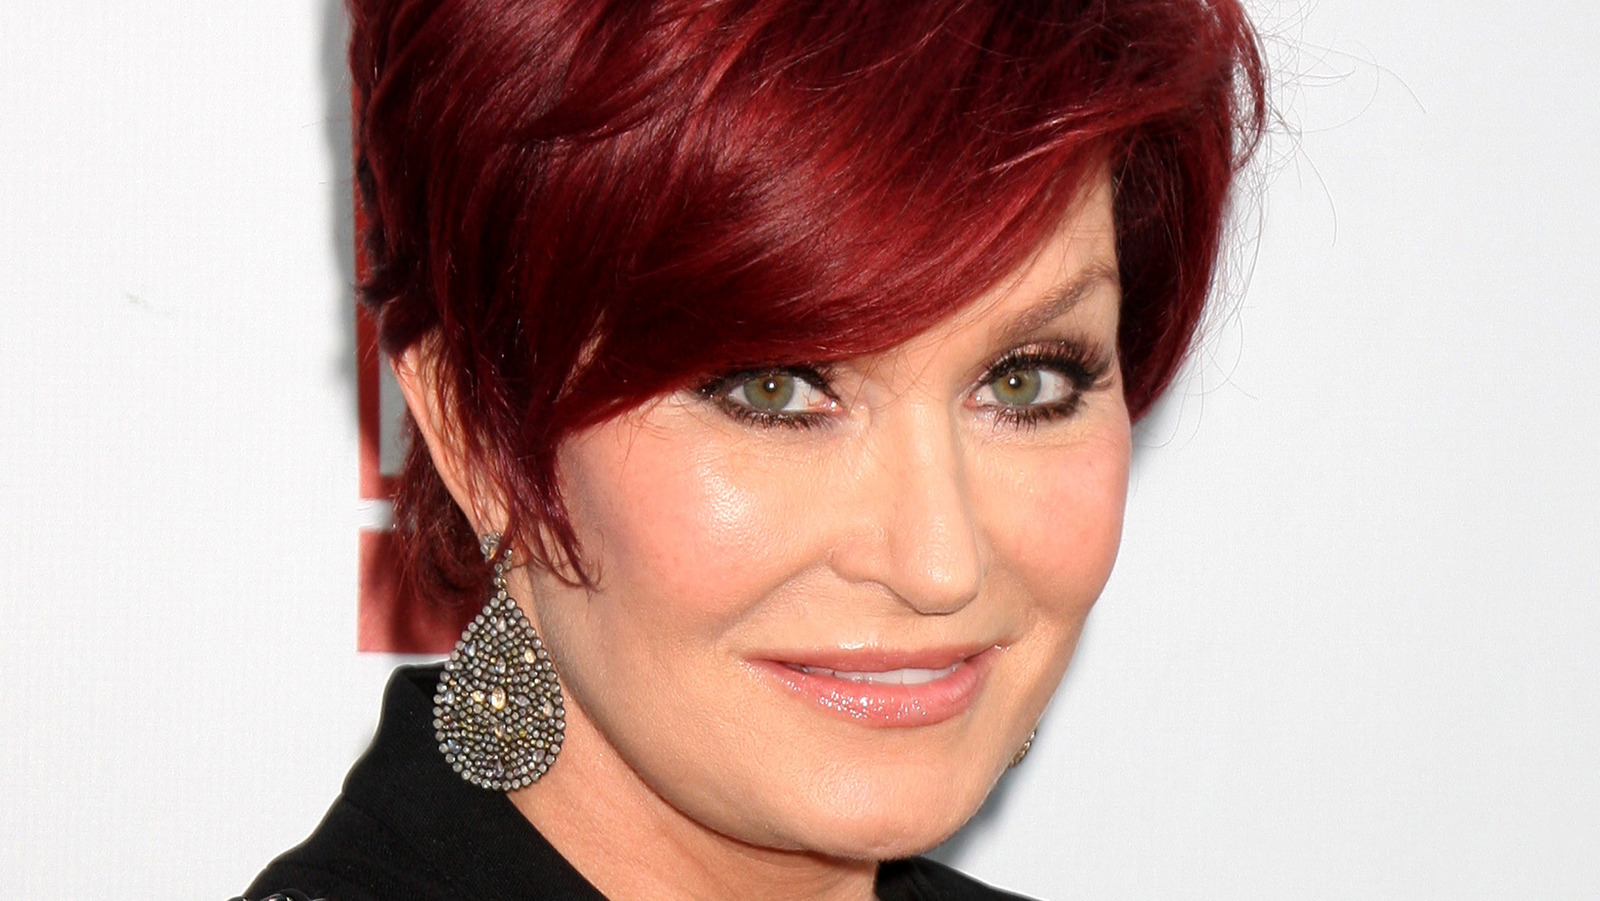 What Sharon Osbourne Really Looks Like Underneath All That Makeup.